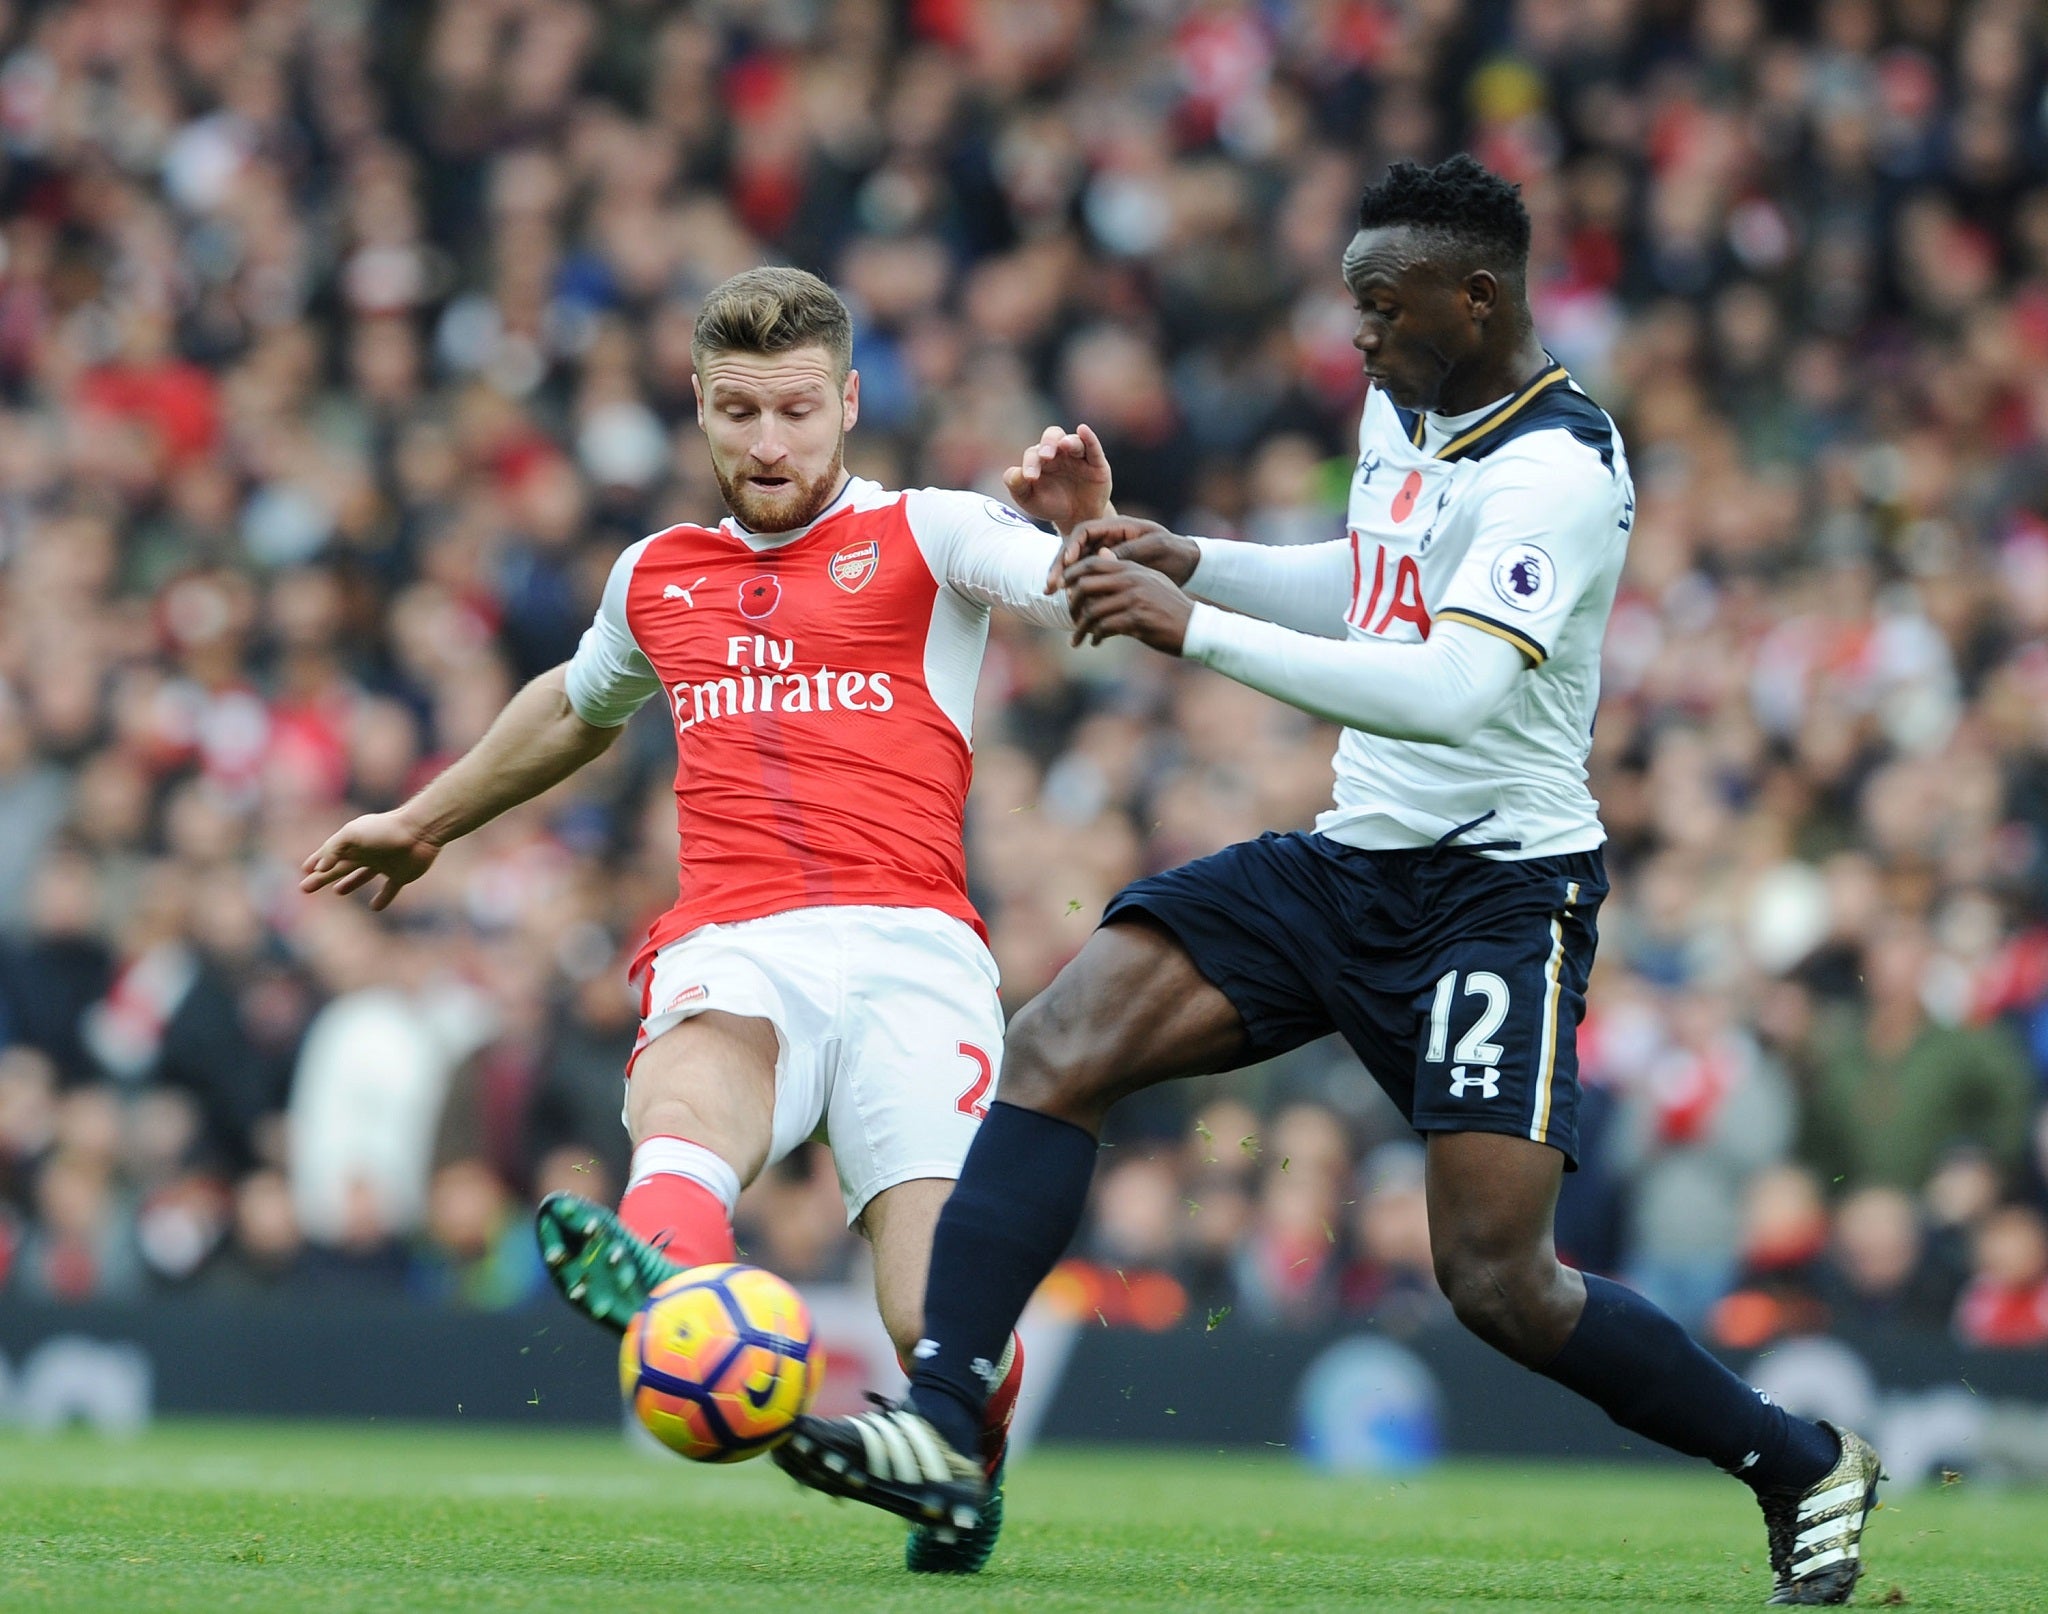 Victor Wanyama was lucky not to be sent-off, according to Arsenal manager Arsene Wenger